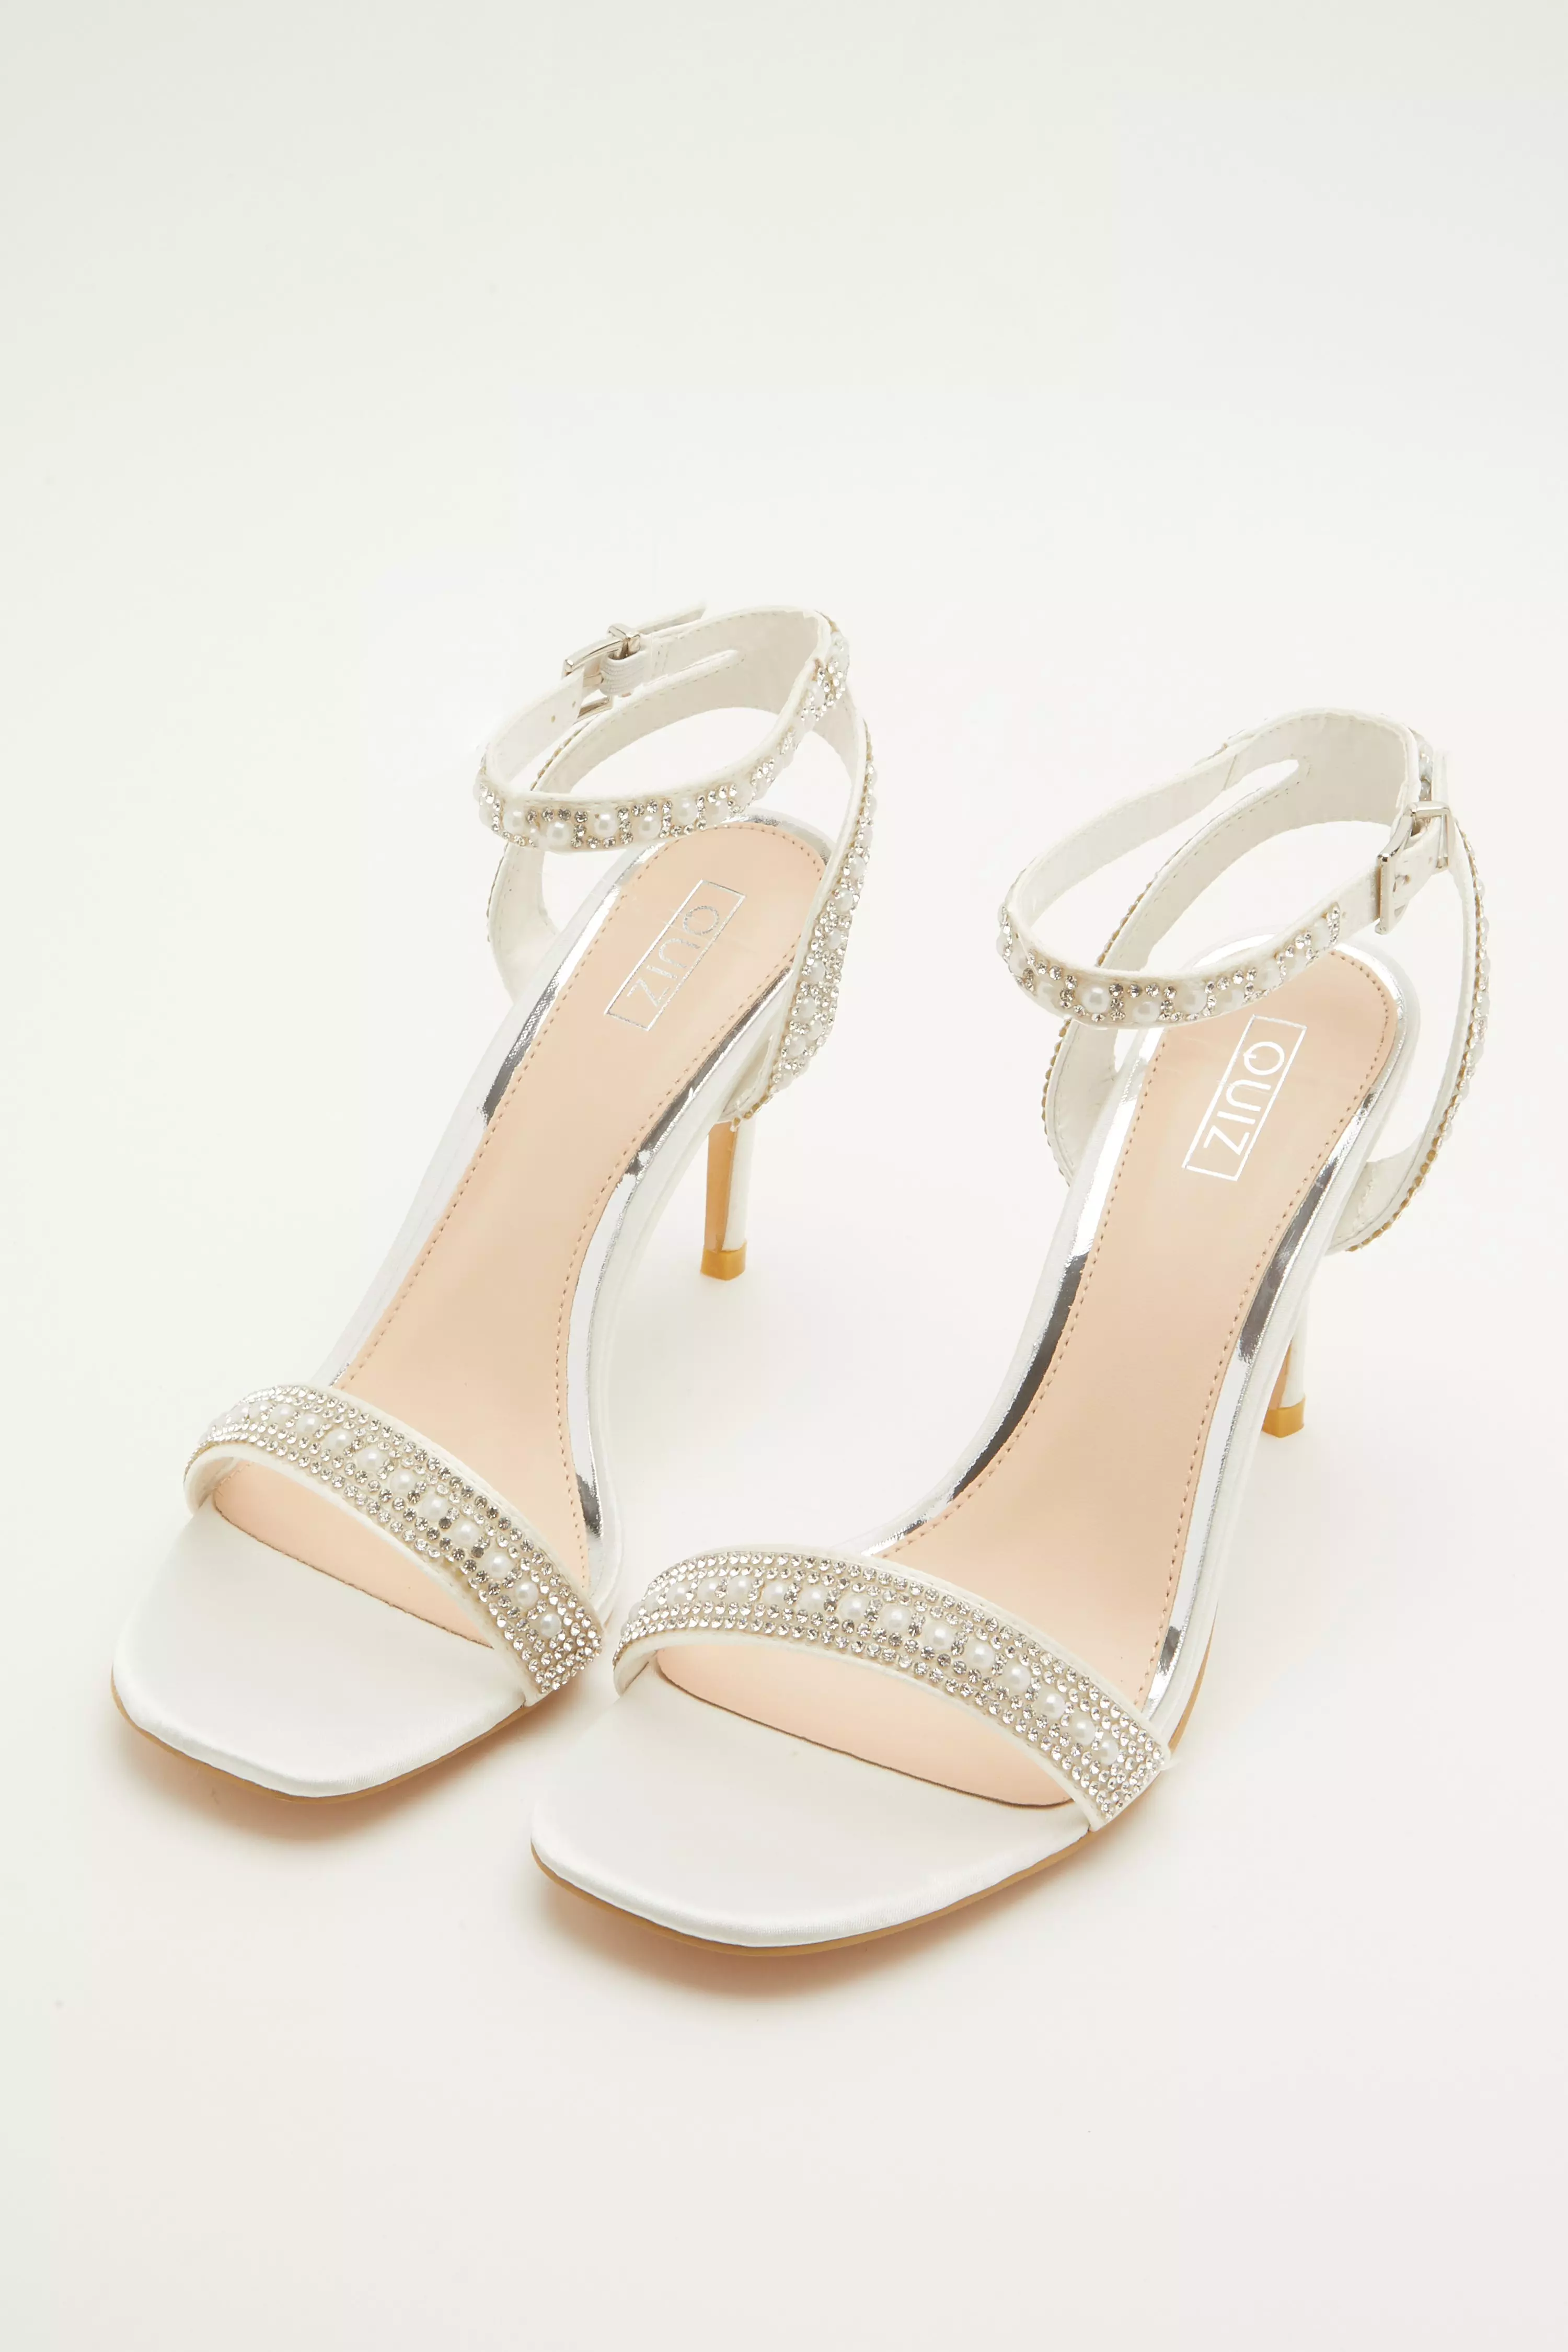 Bridal White Pearl Heeled Sandals - QUIZ Clothing